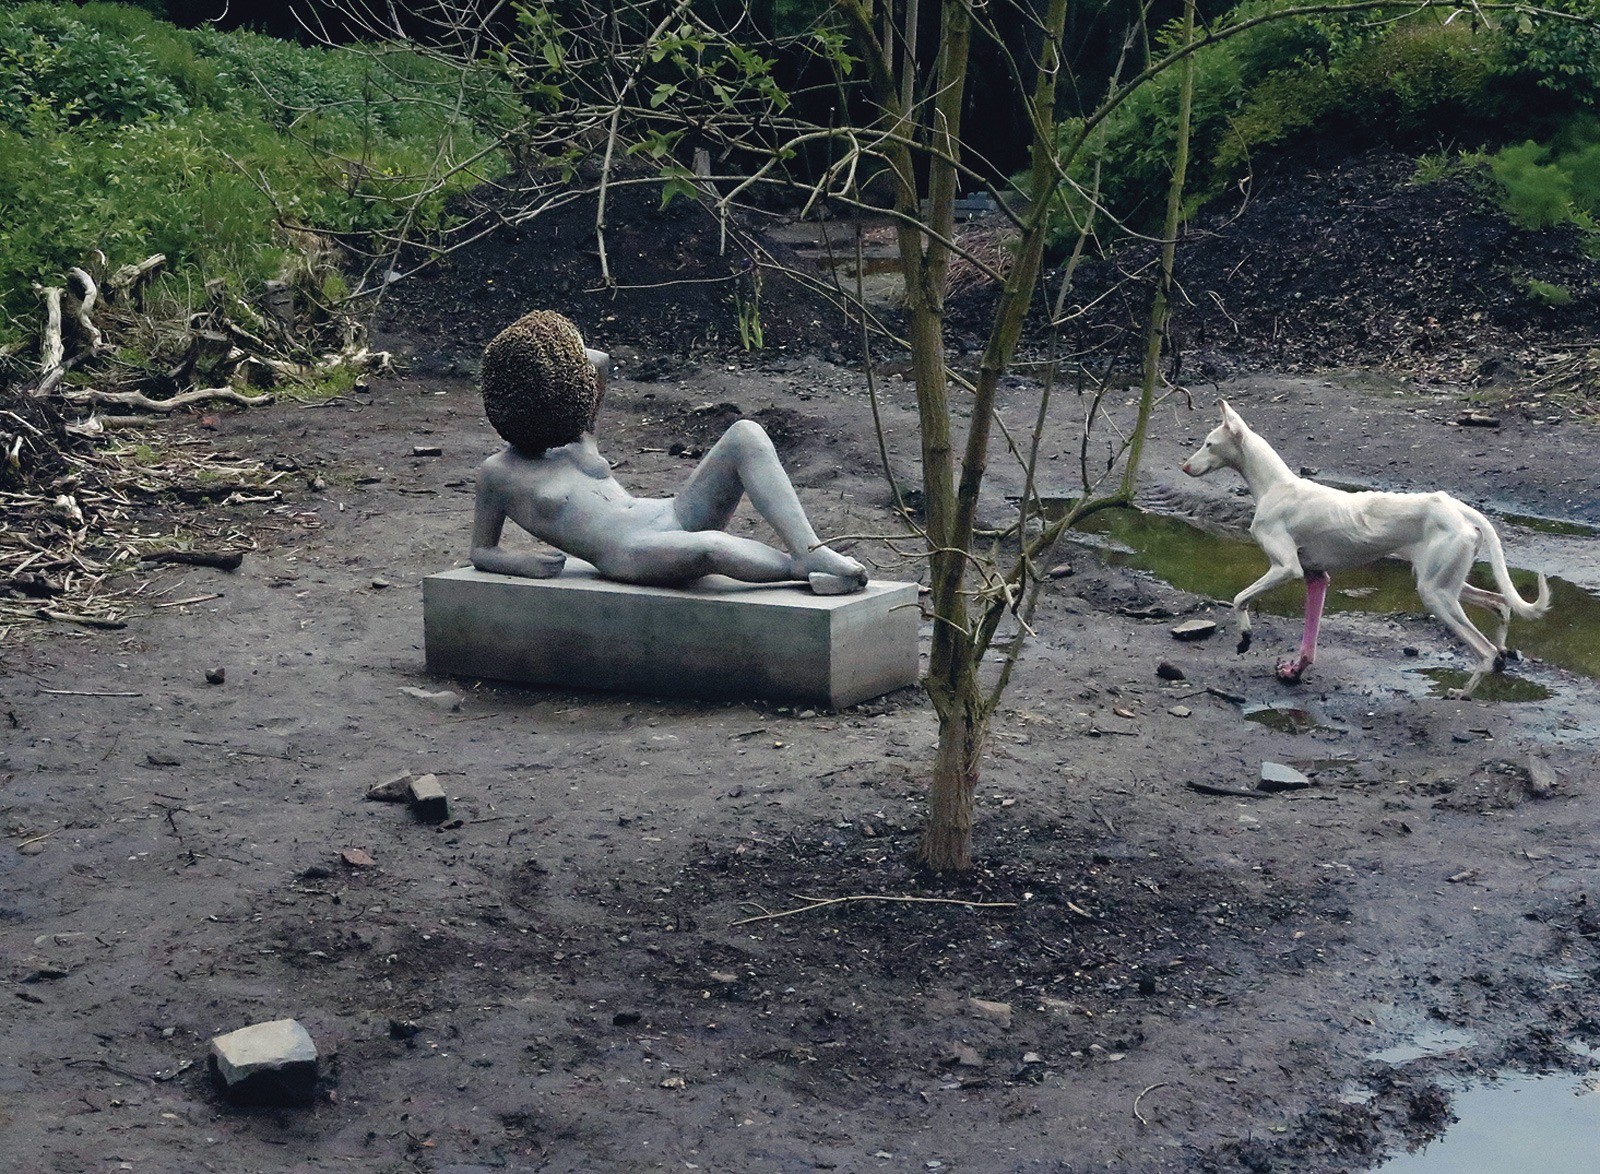 Pierre Huig. Uncone, 2011-2012 Image provided by the author, Mariam Goodman Gallery, New York; Esther Schipper, Berlin. Especially for dOCUMENTA (13). © Pierre Huyghe